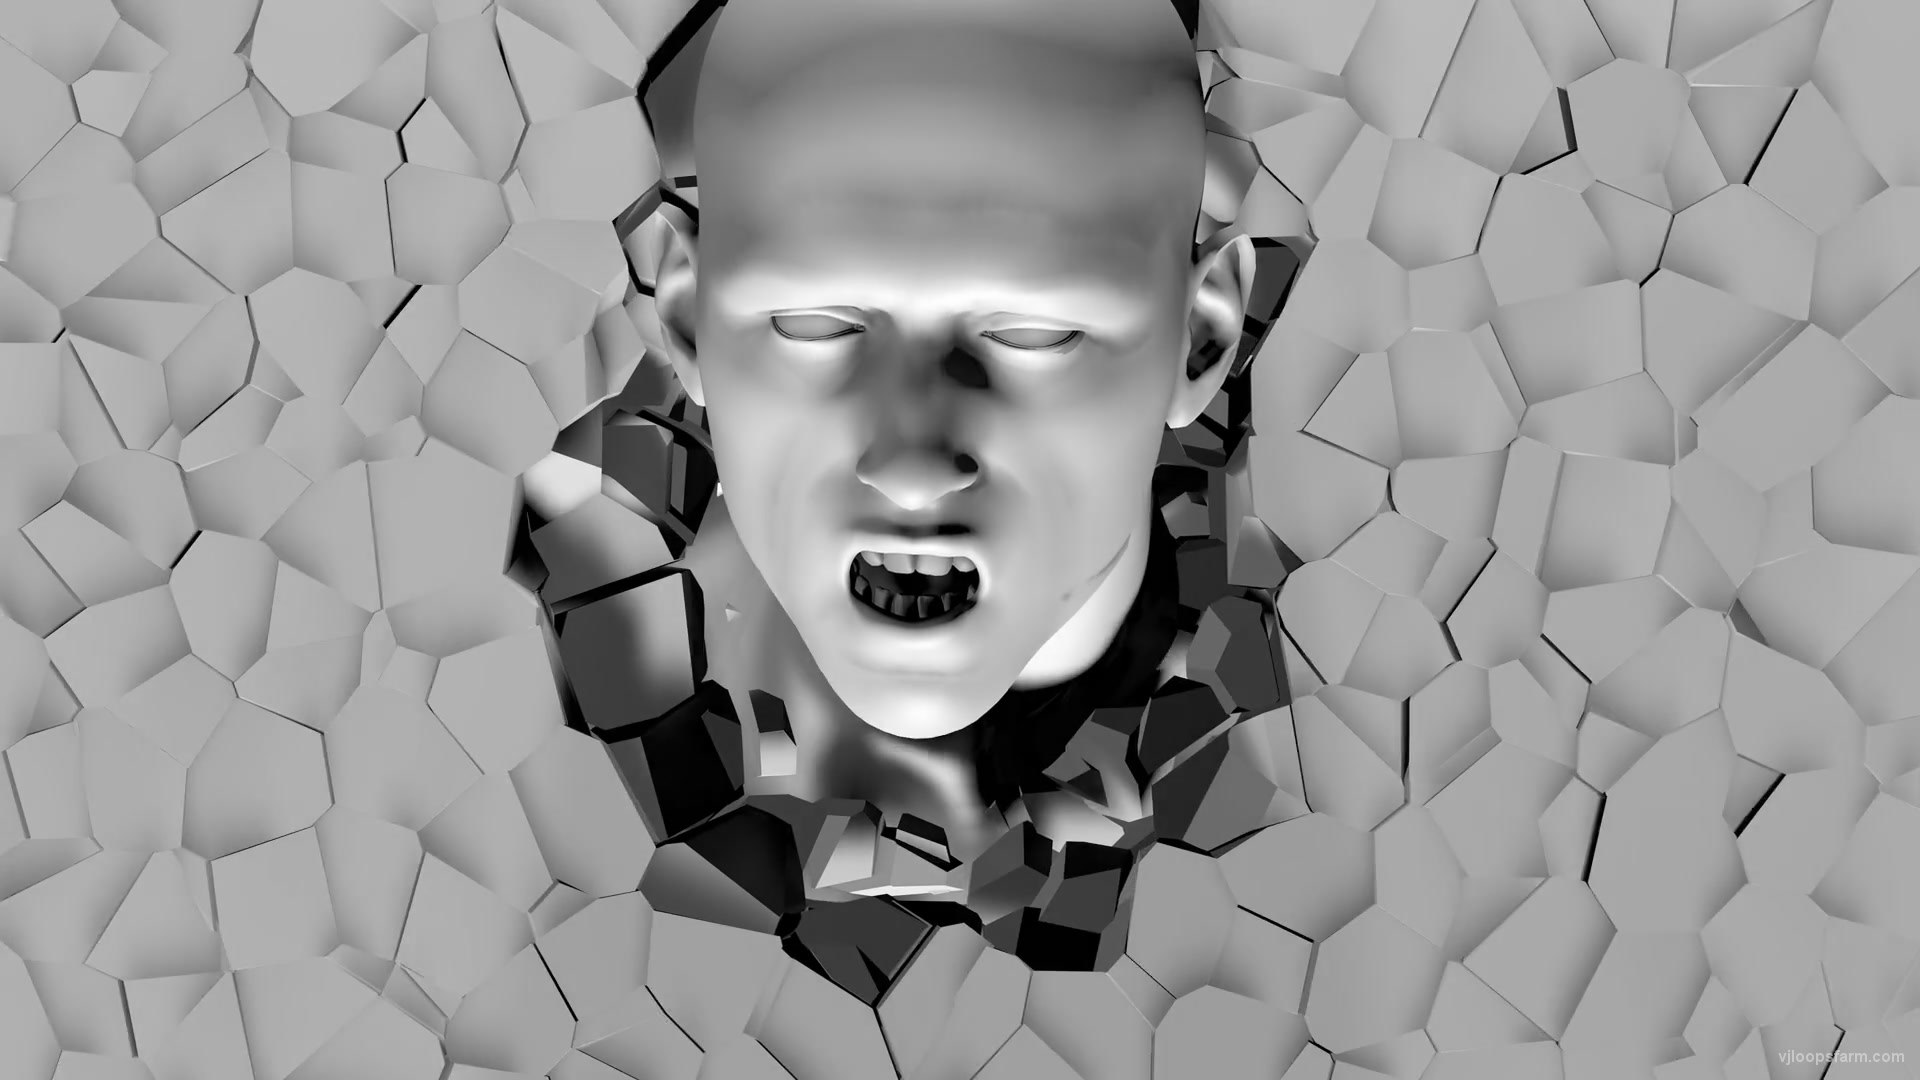 Scream Face Head Mapping on 3D Wall Video Loop